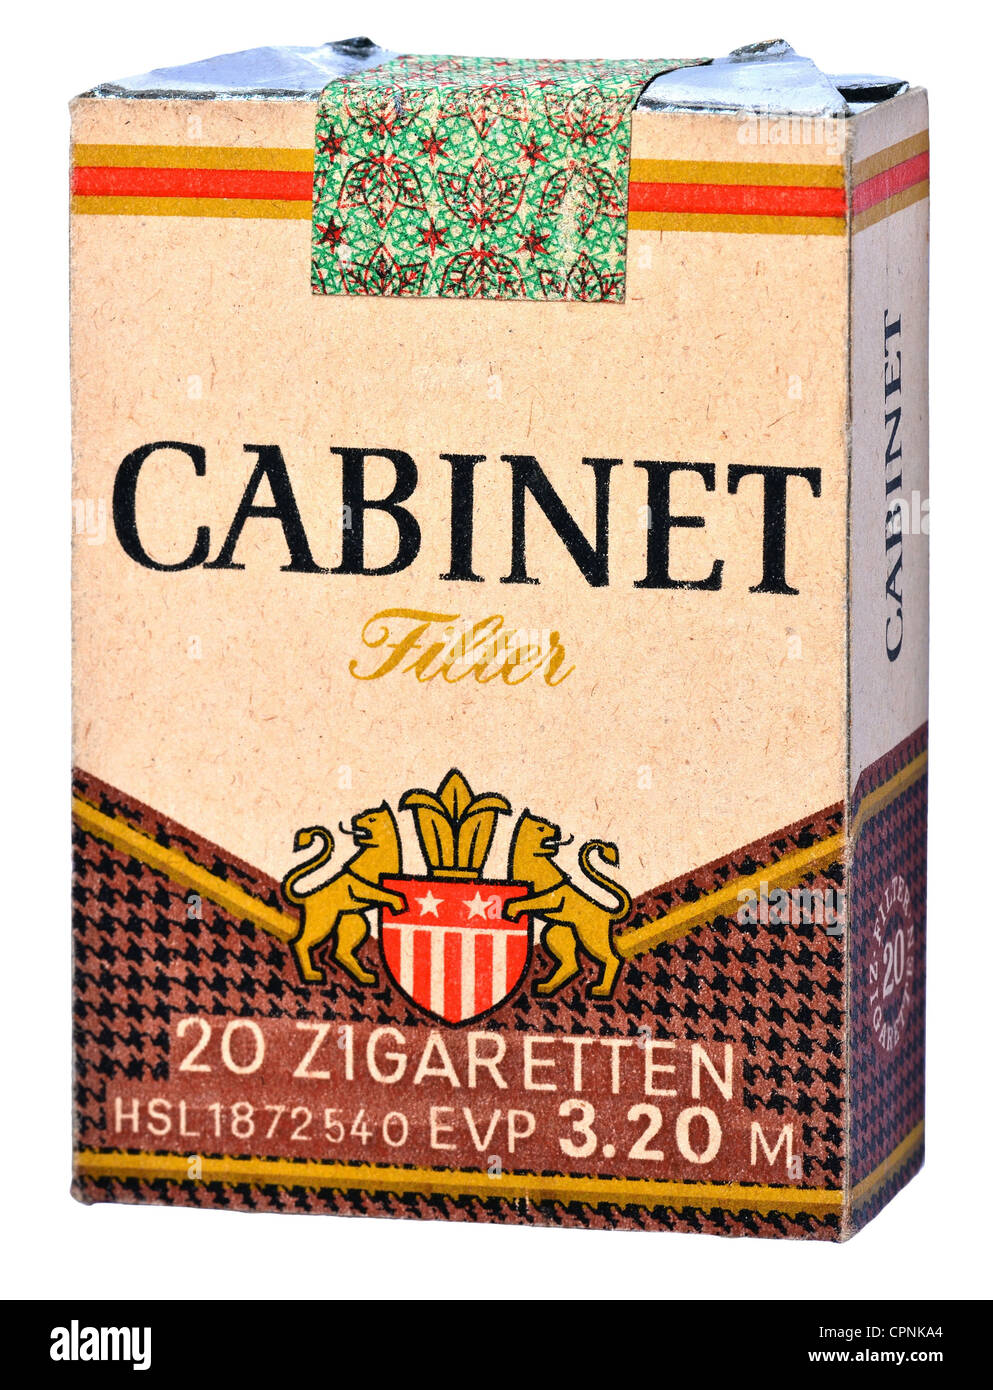 tobacco,cigarette packet,Cabinet Filter,East-Germany cigarette,Cabinet,made by: VEB Tabak Nordhausen und Vereinigte Zigarettenfabriken Dresden,the brand Cabinet was launched 1972,original price 3.20 Mark,East-Germany,circa 1985,full-flavoured,pack,boxed as new,original packing,original wrapping,original packings,original wrappings,unopen,suggested retail price,cigarette price,tobacco price,20 cigarette,with filter,filter tipped cigarette,filter-tip,filter tipped cigarettes,filter-tips,cigarette,tobacco,baccy,tabac,cigarette produc,Additional-Rights-Clearences-Not Available Stock Photo